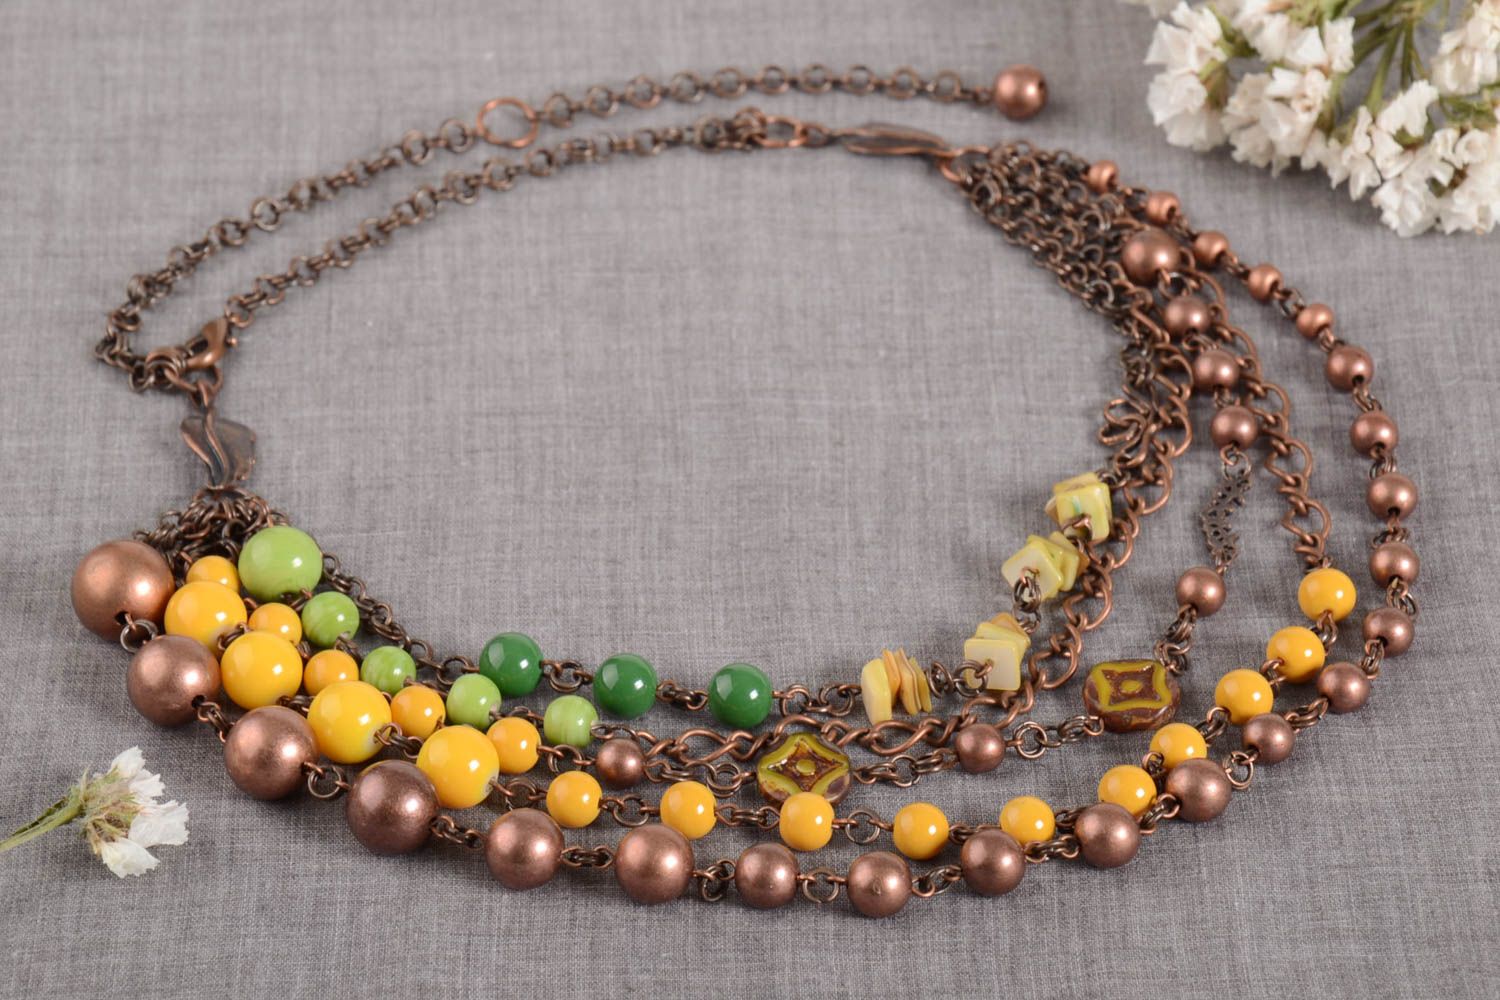 Beautiful handmade beaded necklace glass necklace neck accessories ideas photo 1